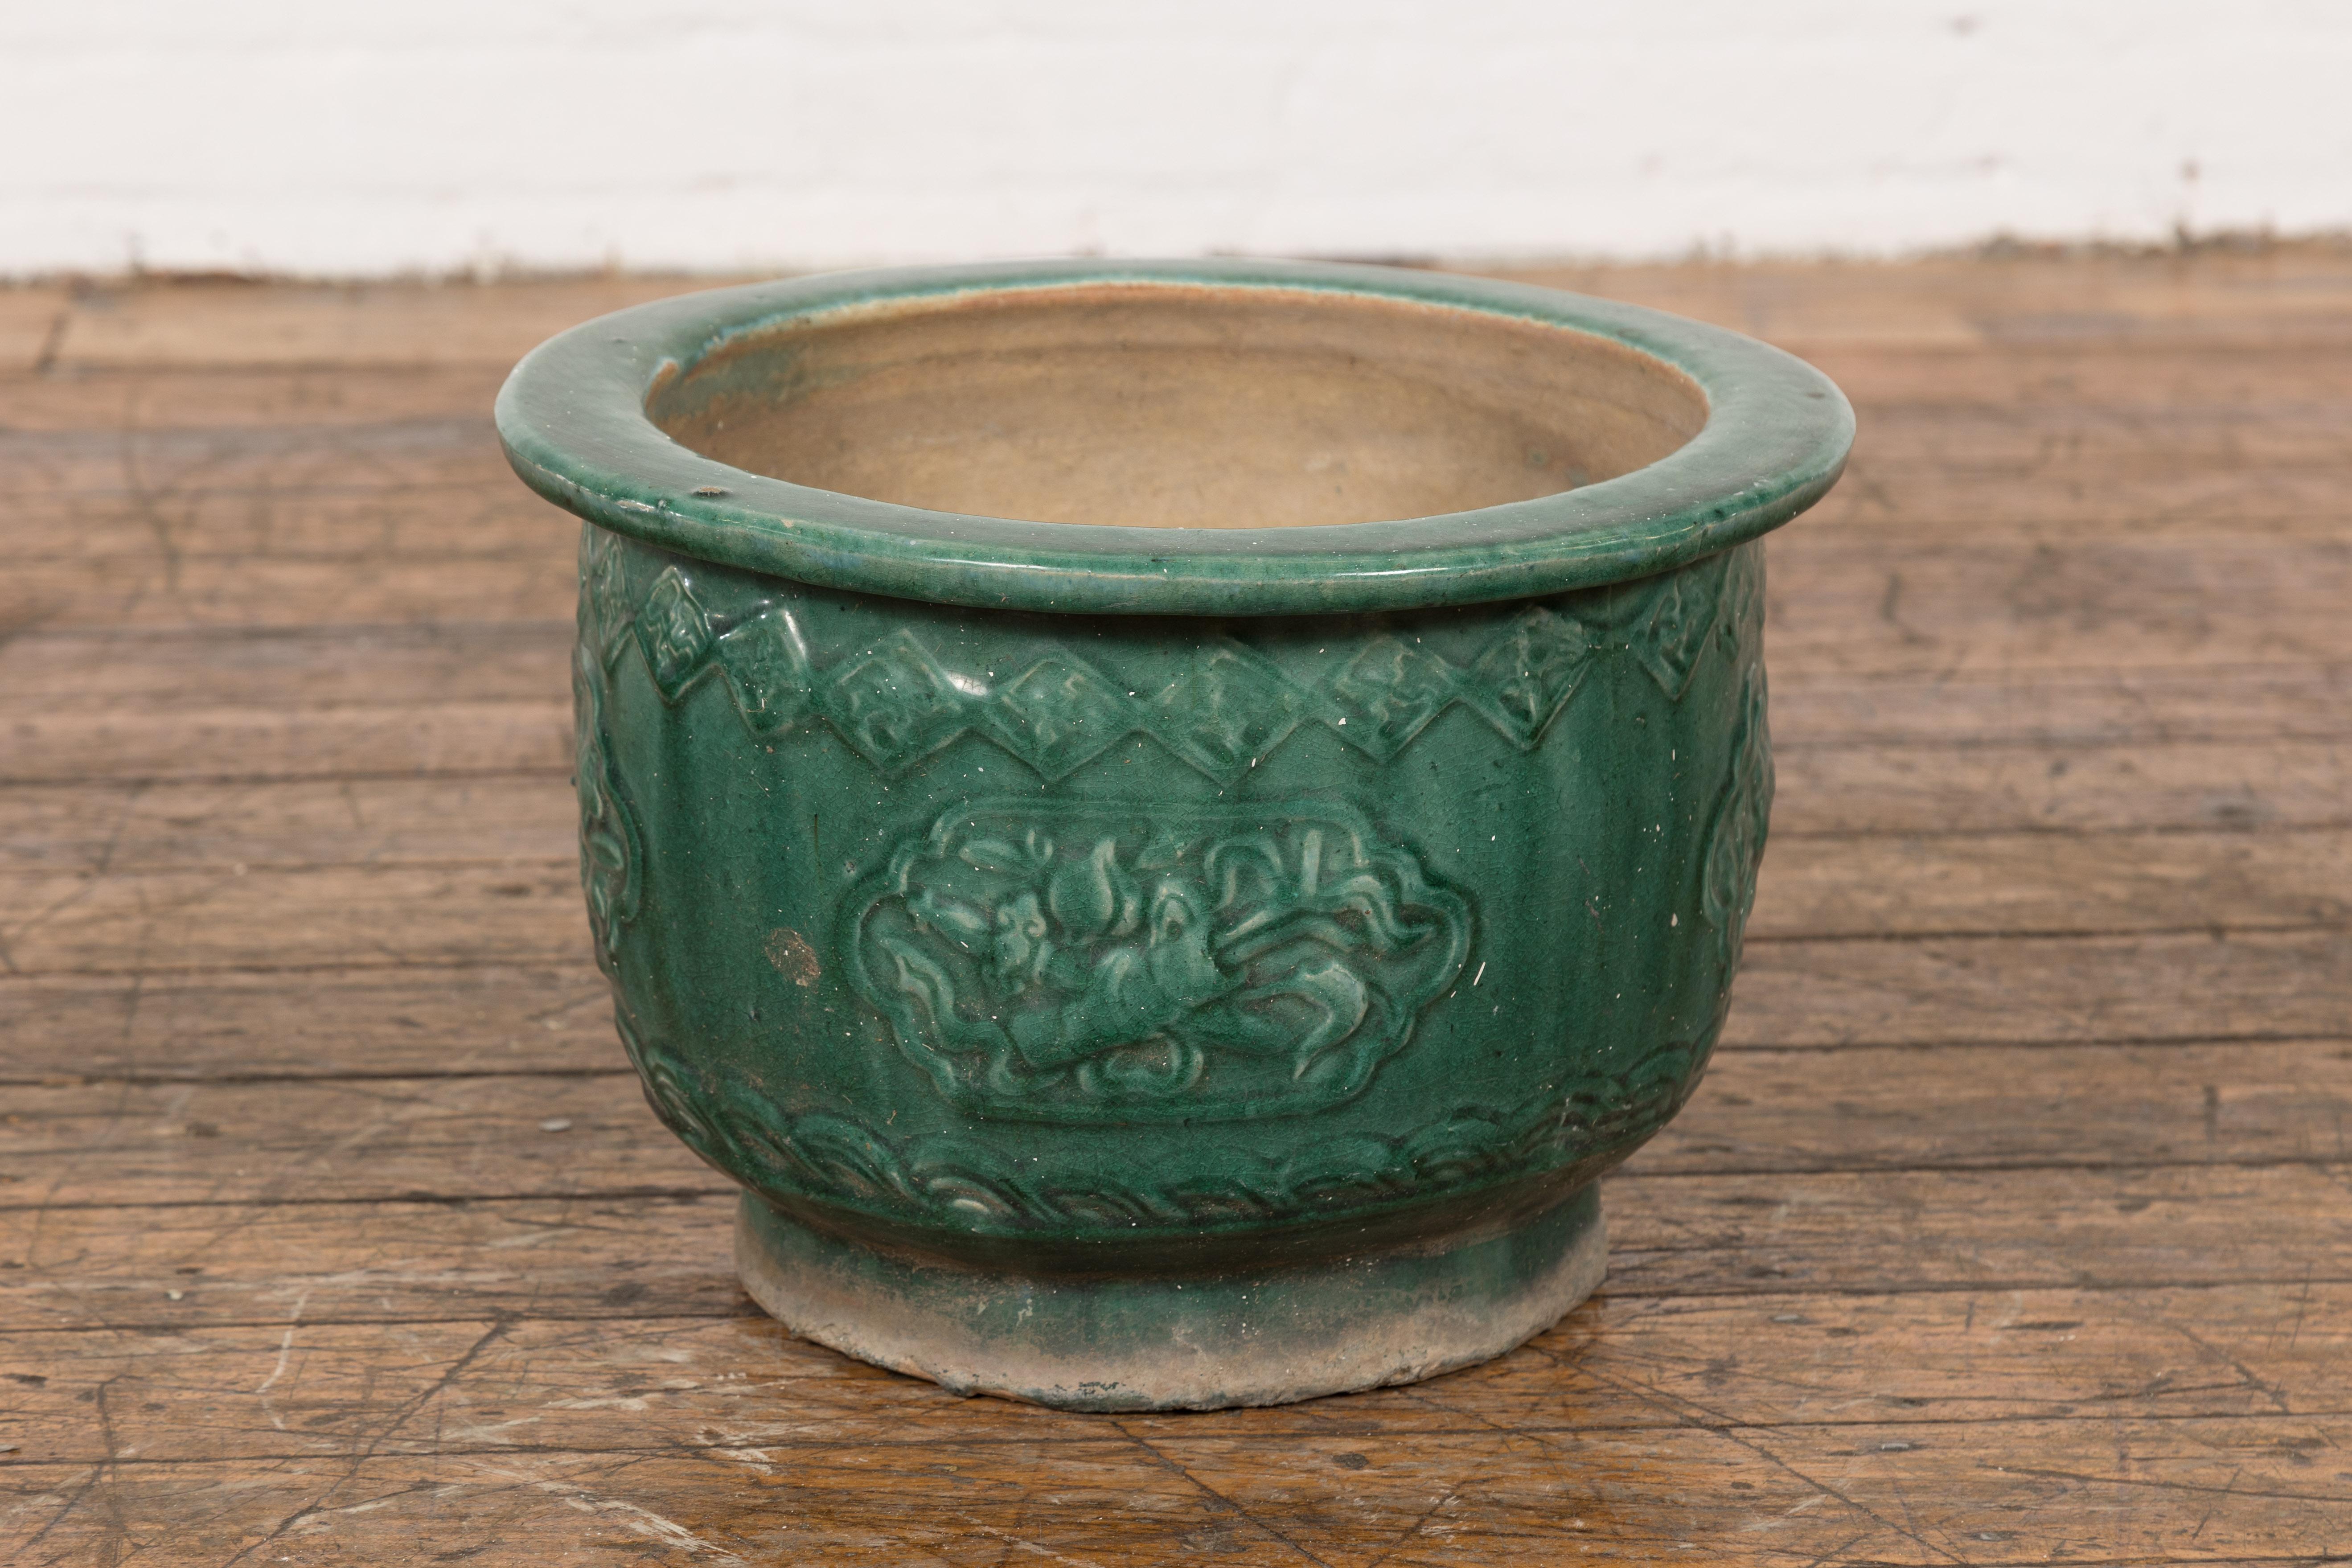 A small Chinese Qing Dynasty period Hunan style green glaze planter from the 19th century with raised cartouches surrounding objects, flowers and foliage. This charming small Chinese Qing Dynasty period Hunan style green glaze planter from the 19th